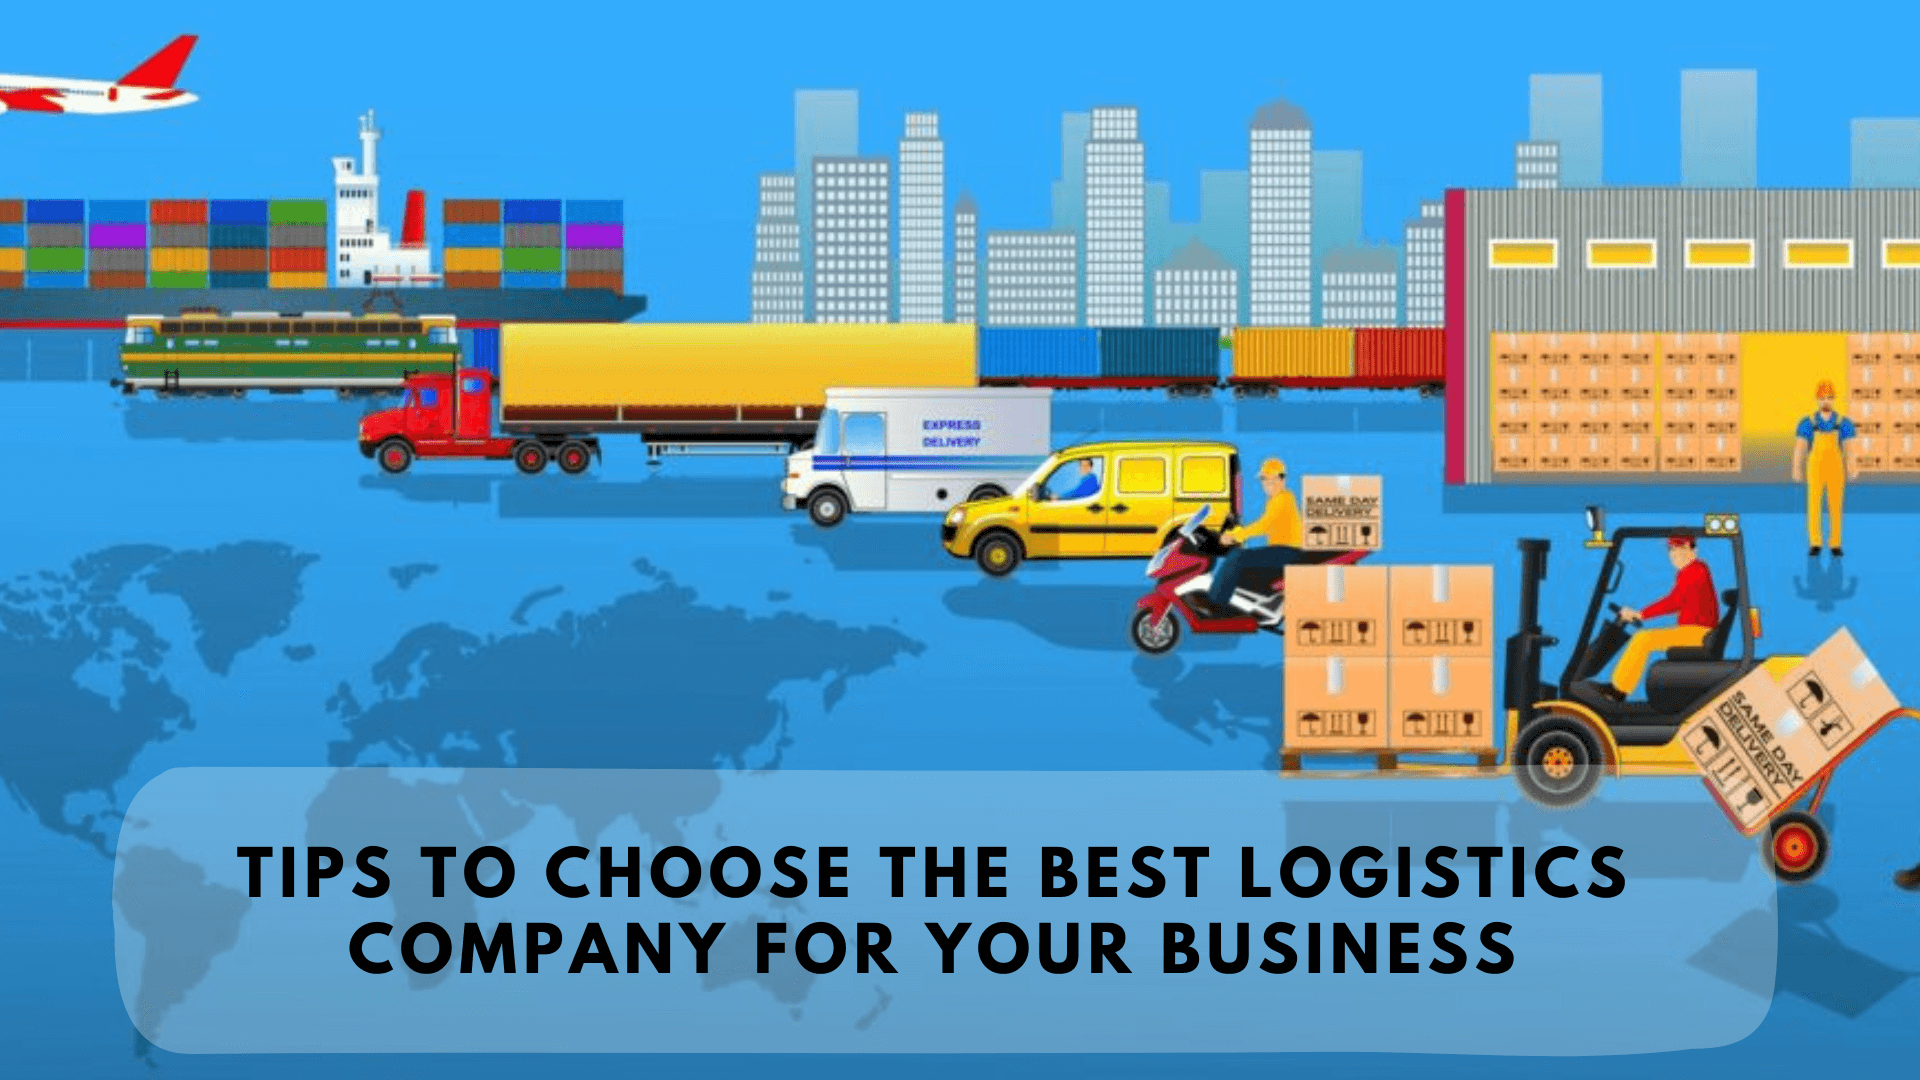 Tips to Choose the Best Logistics Company for Your Business